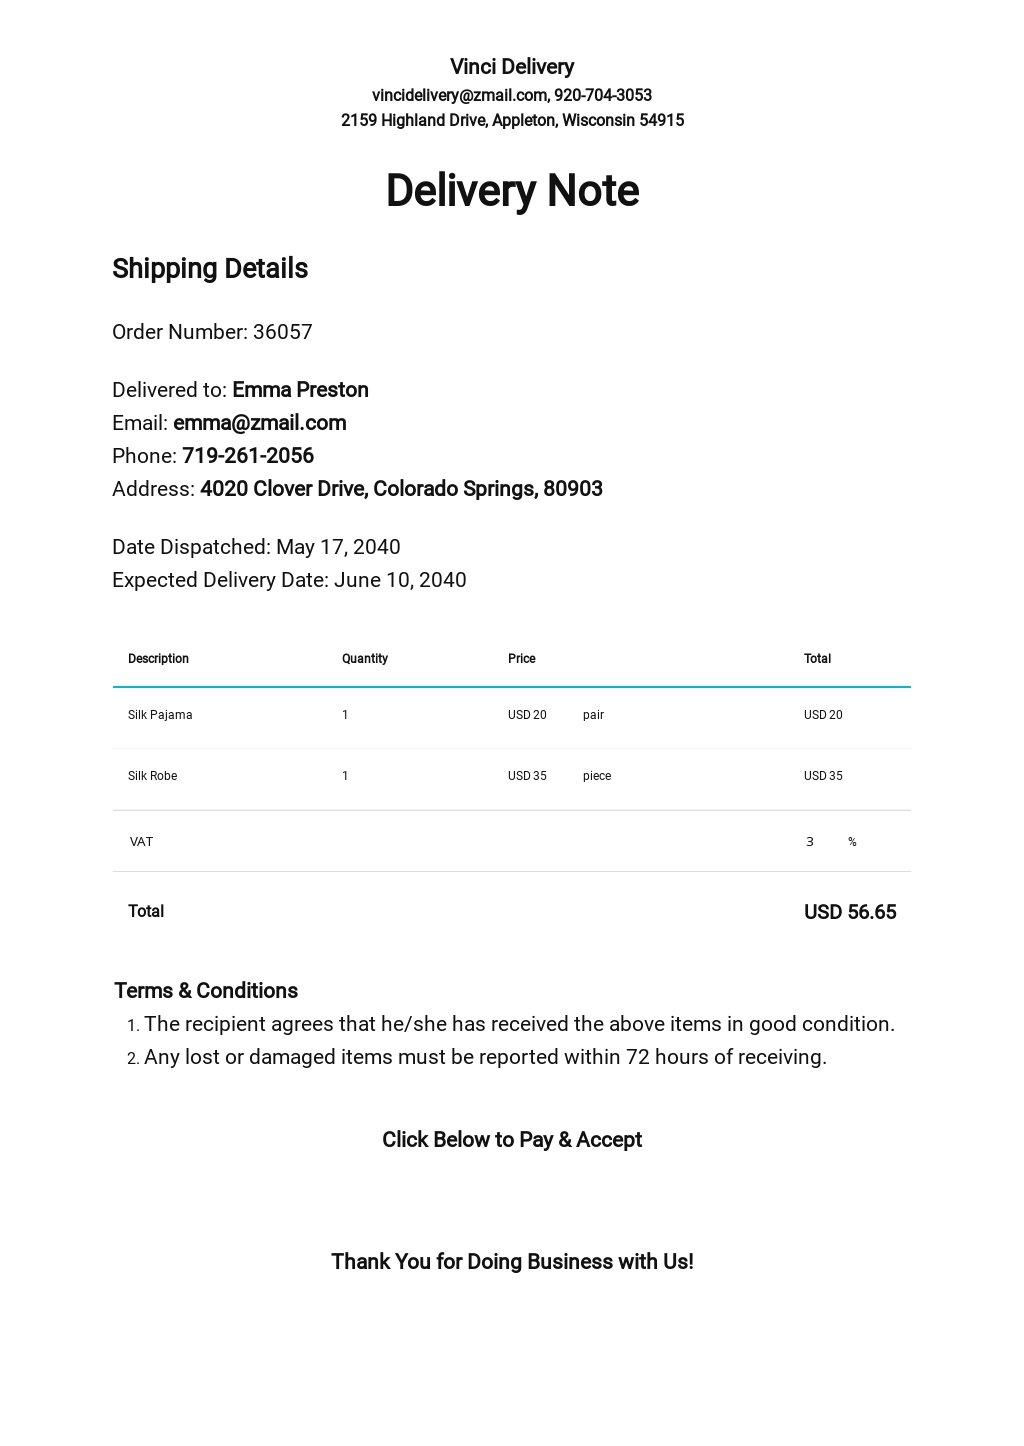 Simple Delivery Note Template - Excel, Word, Apple Numbers, Apple Throughout Standard Shipping Note Template